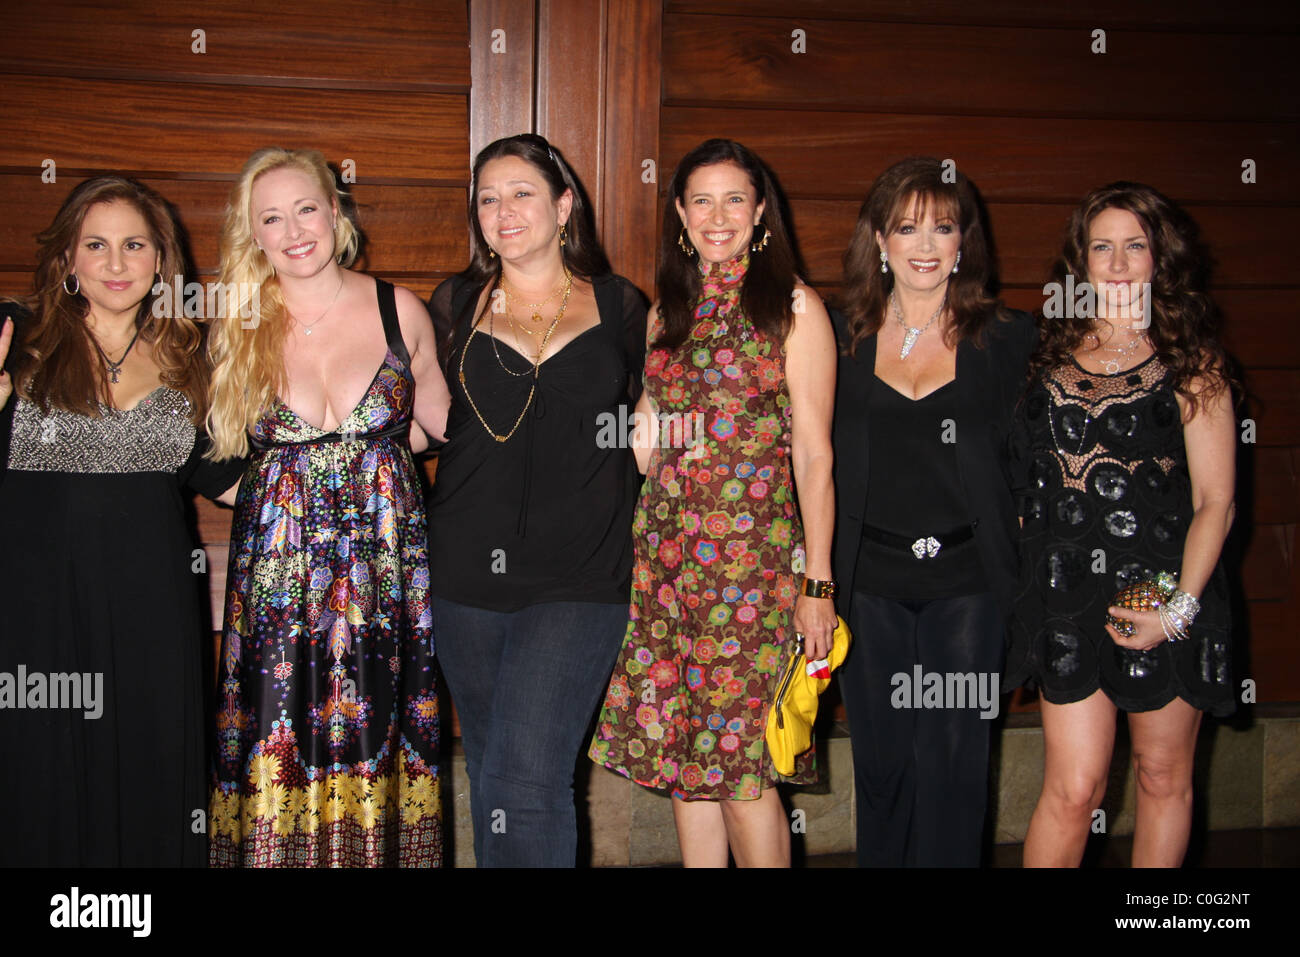 Kathy Najimy, Mindy McCready, Camryn Manheim, Mimi Rogers, Jackie Collins, Joely Fisher The Queens of Heart 2008 Team prepares Stock Photo